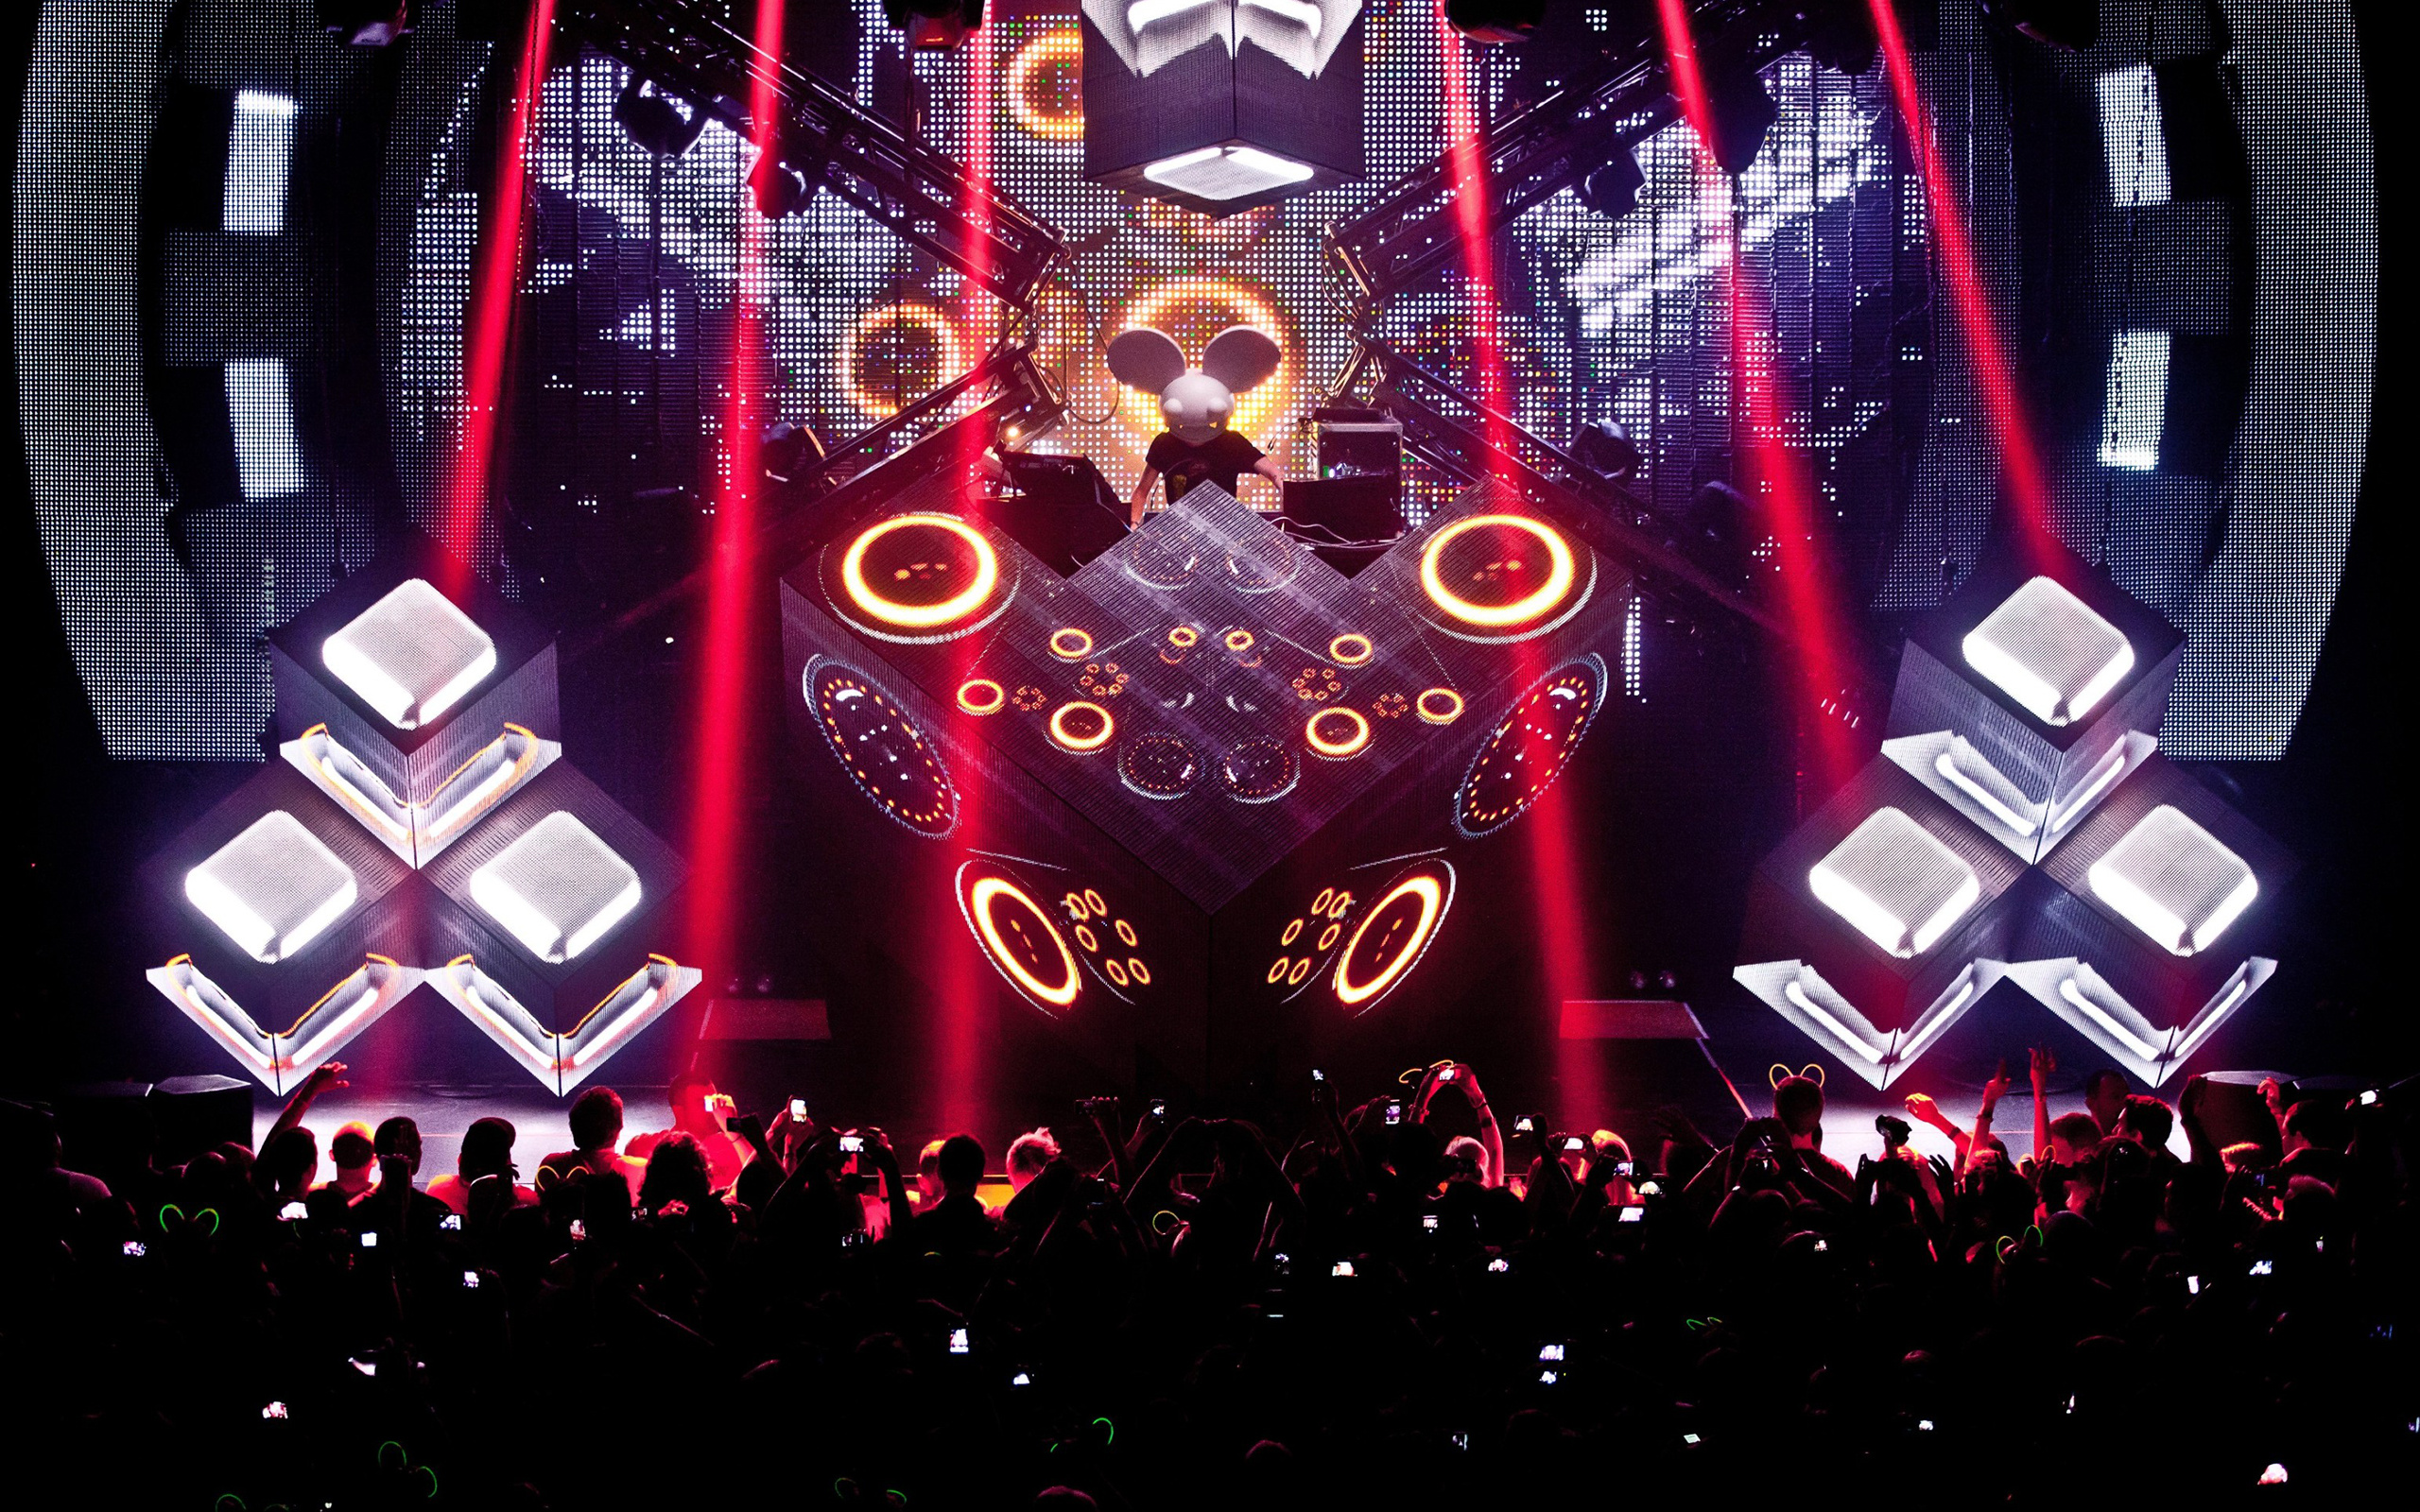 Concert: Deadmau5, A Canadian electronic music producer and DJ, 'Cube V3' tour. 2560x1600 HD Wallpaper.